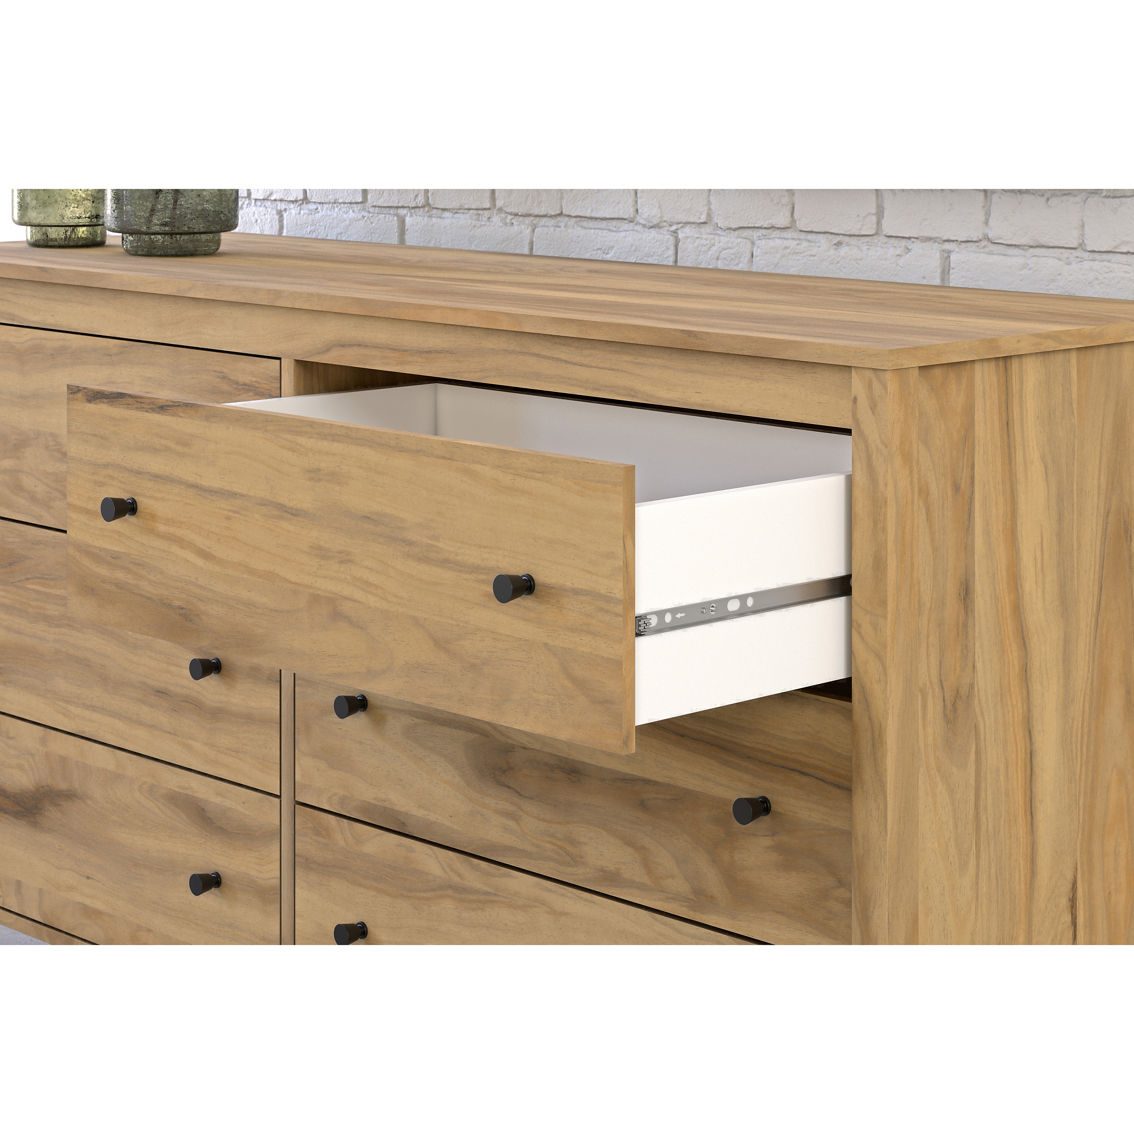 Signature Design by Ashley Bermacy Ready-To-Assemble Dresser - Image 7 of 7